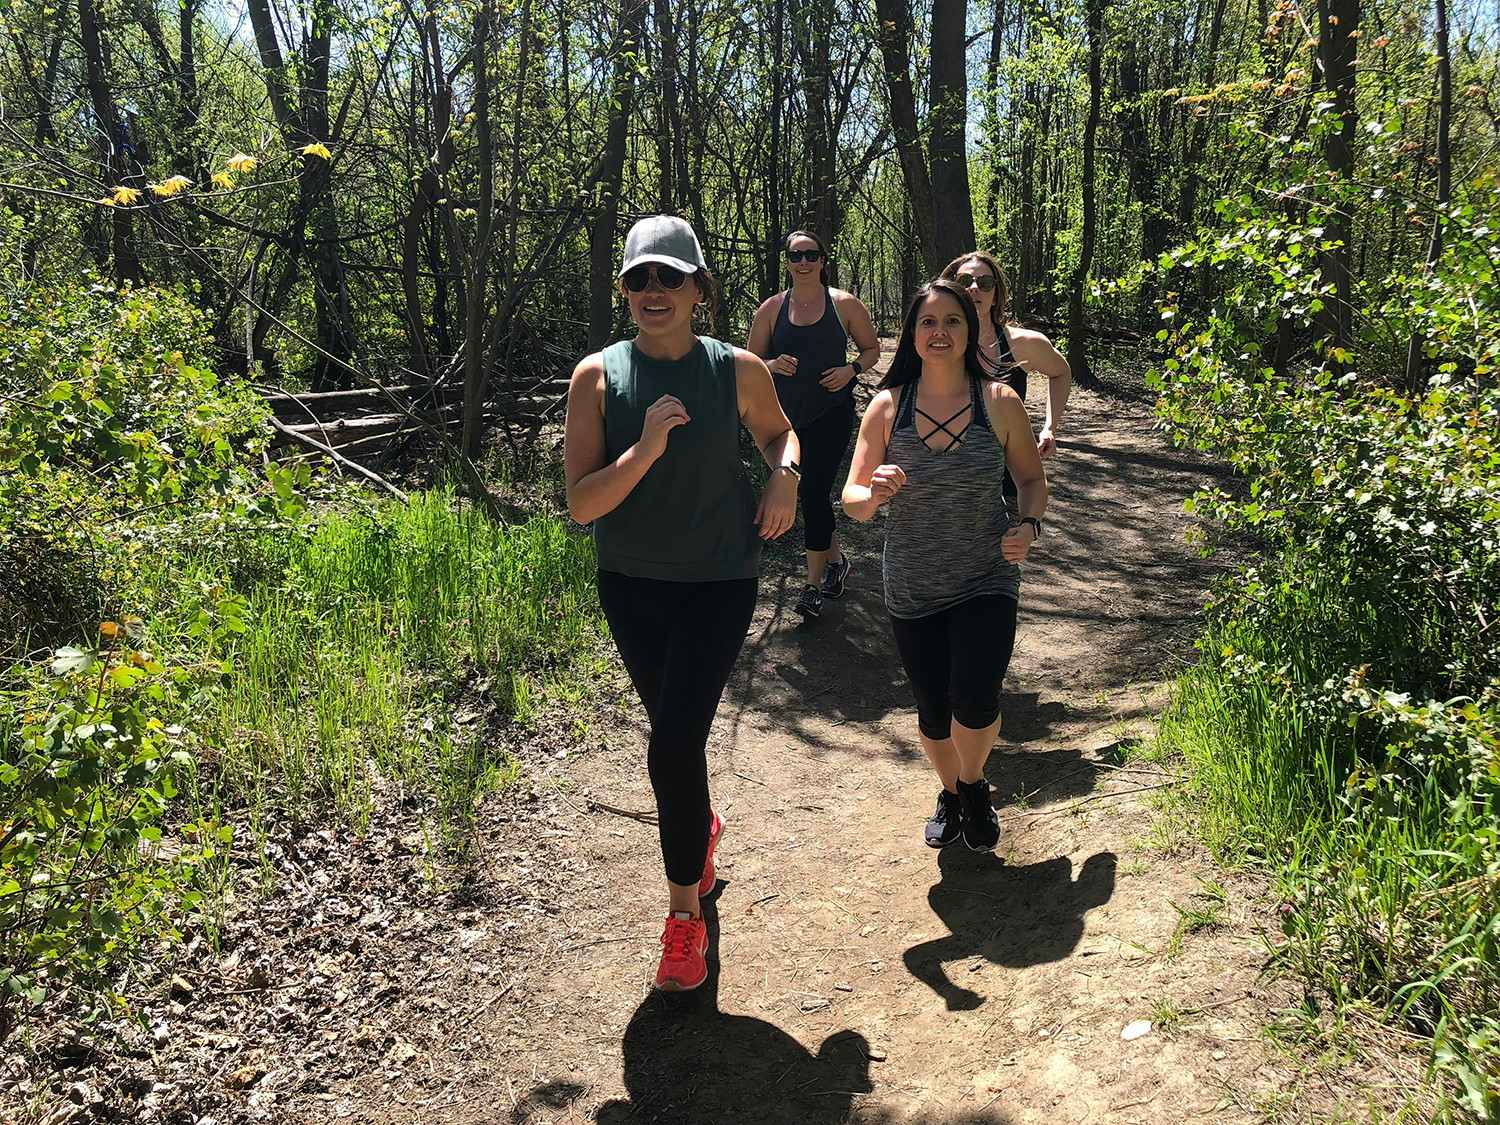 Some women running together on a path through some woods.